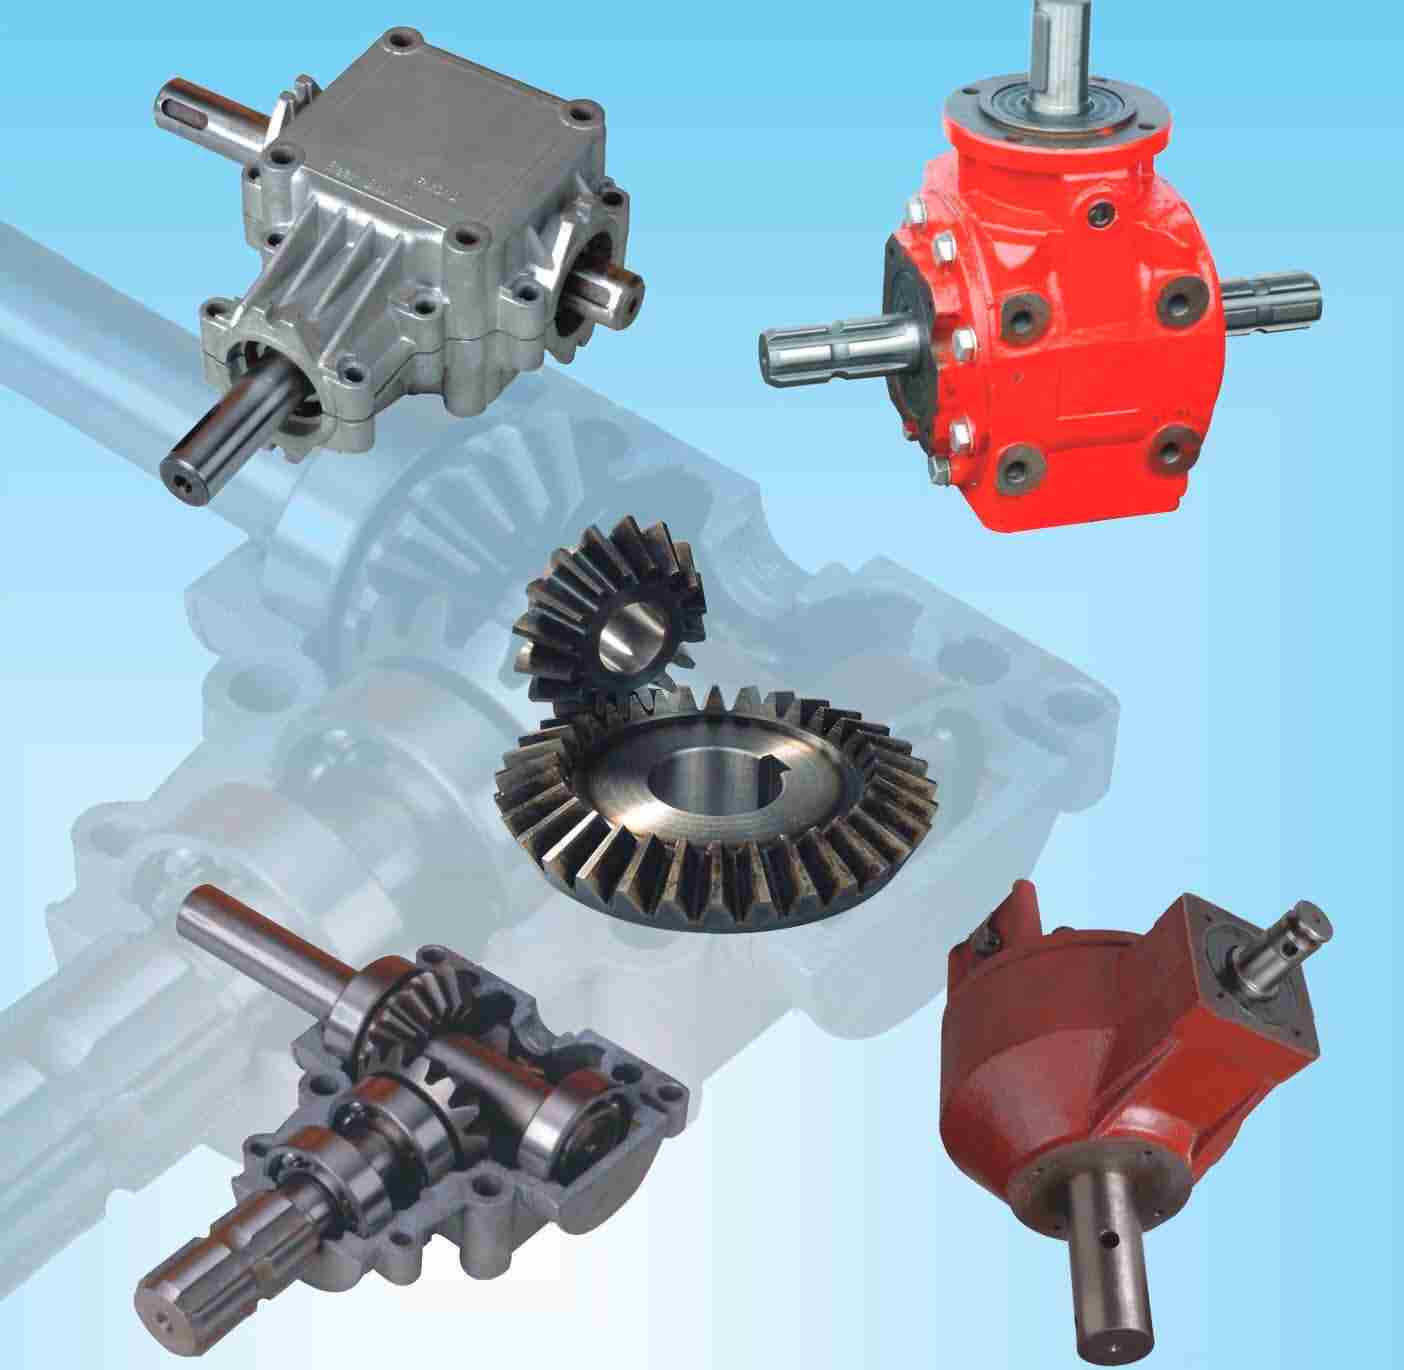 speed reducers, in-line helical gear speed reducers, parallel shaft helical gear reducers, helical bevel reducers, helical worm gear reducers, agricultural gearboxes, tractor gearboxes